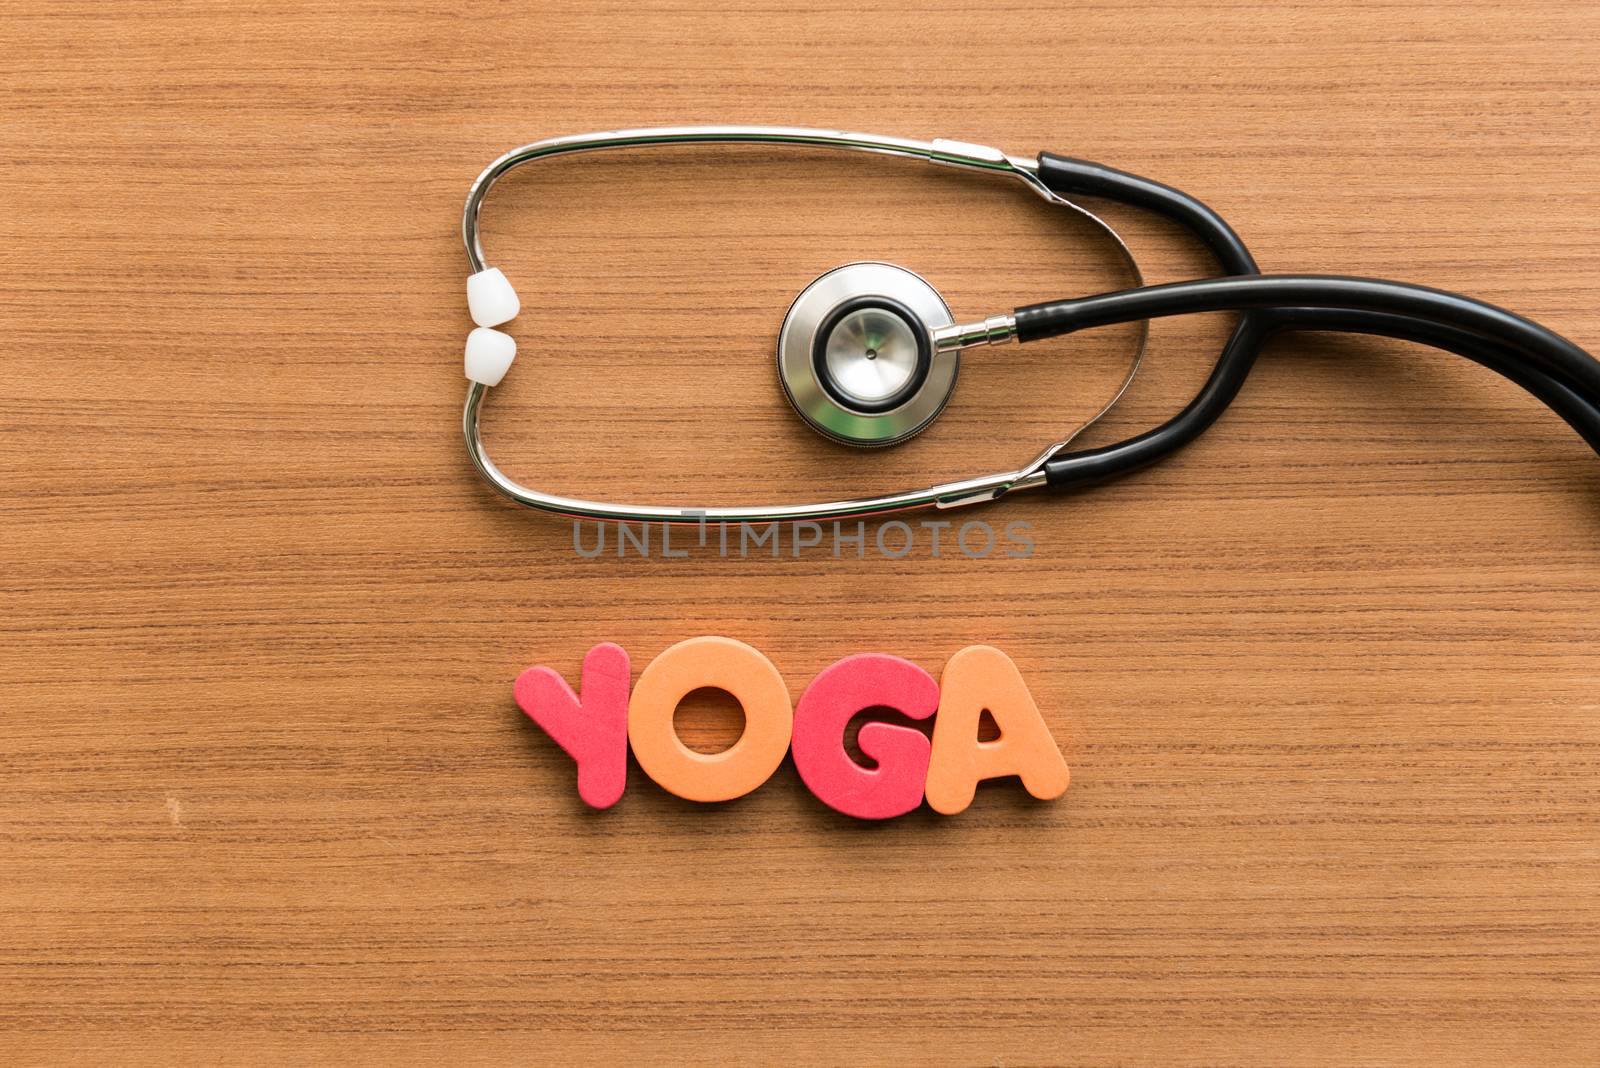 yoga colorful word with stethoscope by sohel.parvez@hotmail.com